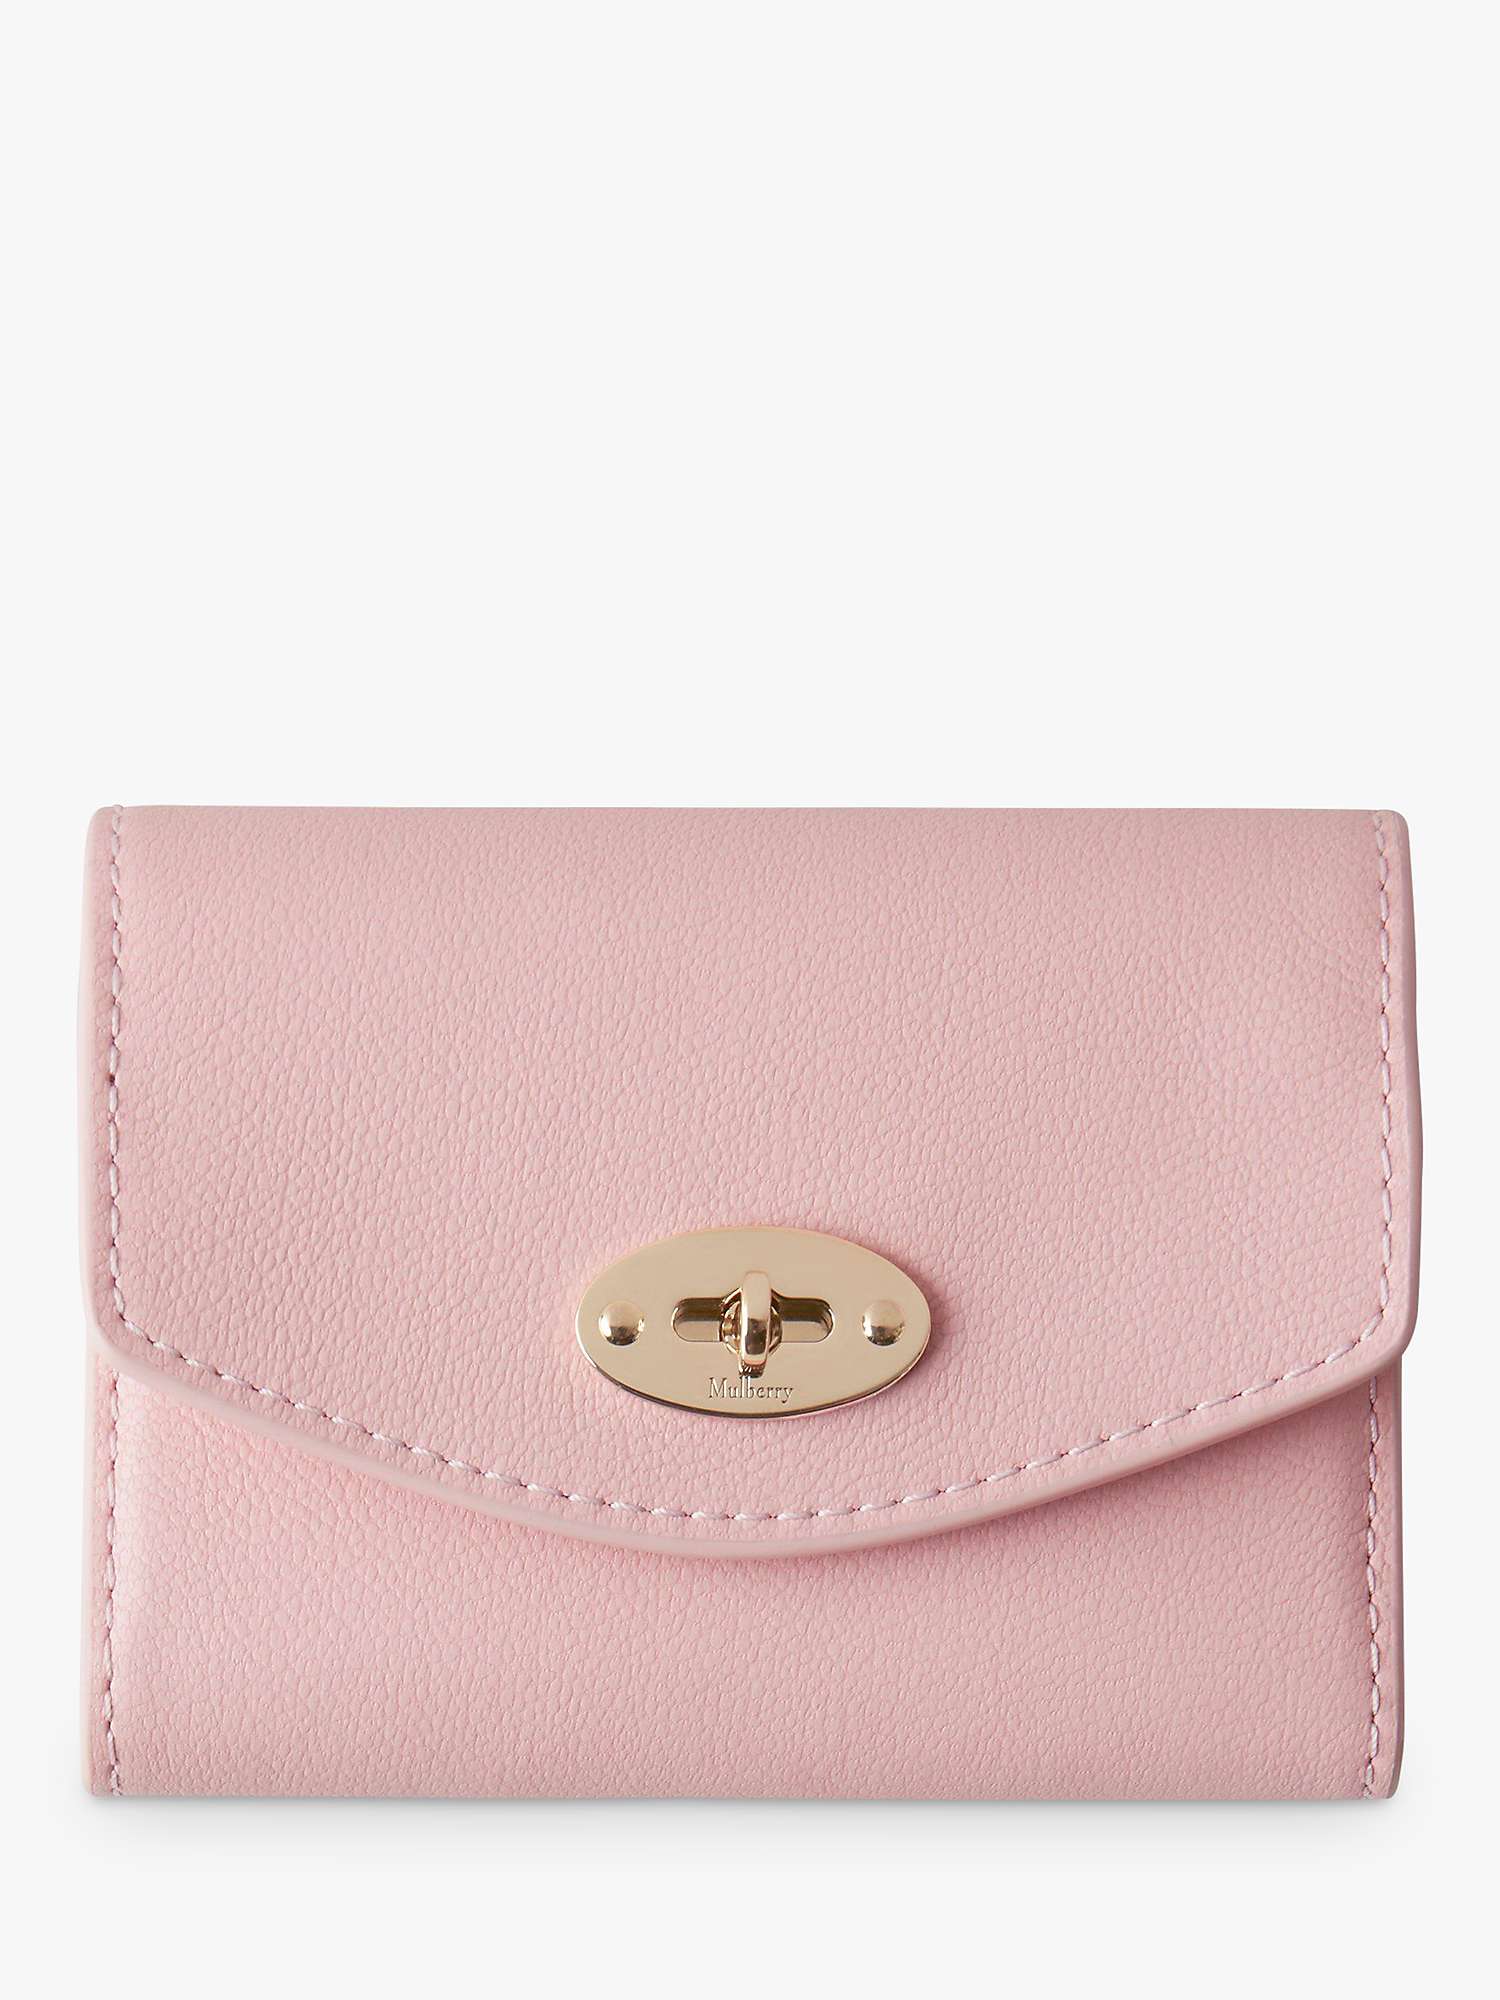 Buy Mulberry Darley Micro Classic Grain Leather Concertina Wallet, Powder Rose Online at johnlewis.com